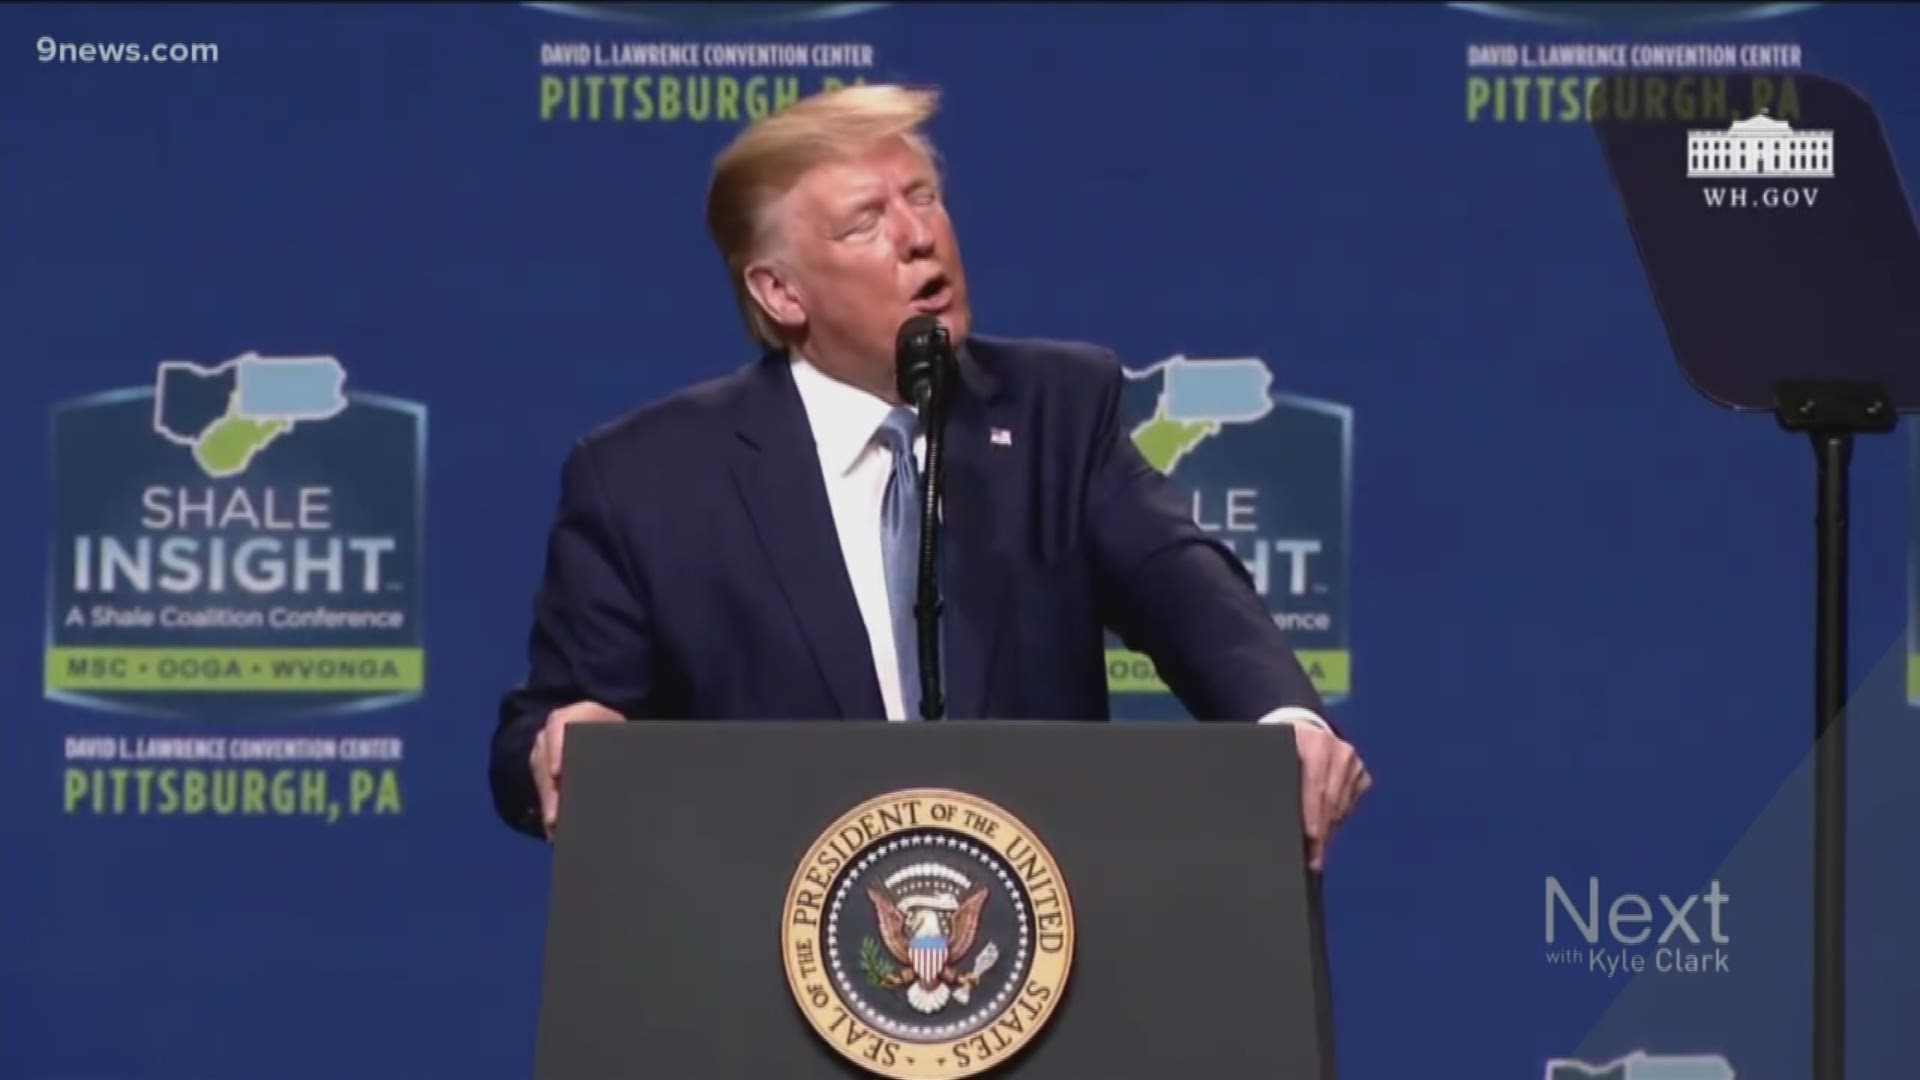 "And we’re building a wall in Colorado. We’re building a beautiful wall – a big one that really works," President Trump said Wednesday in Pittsburgh.